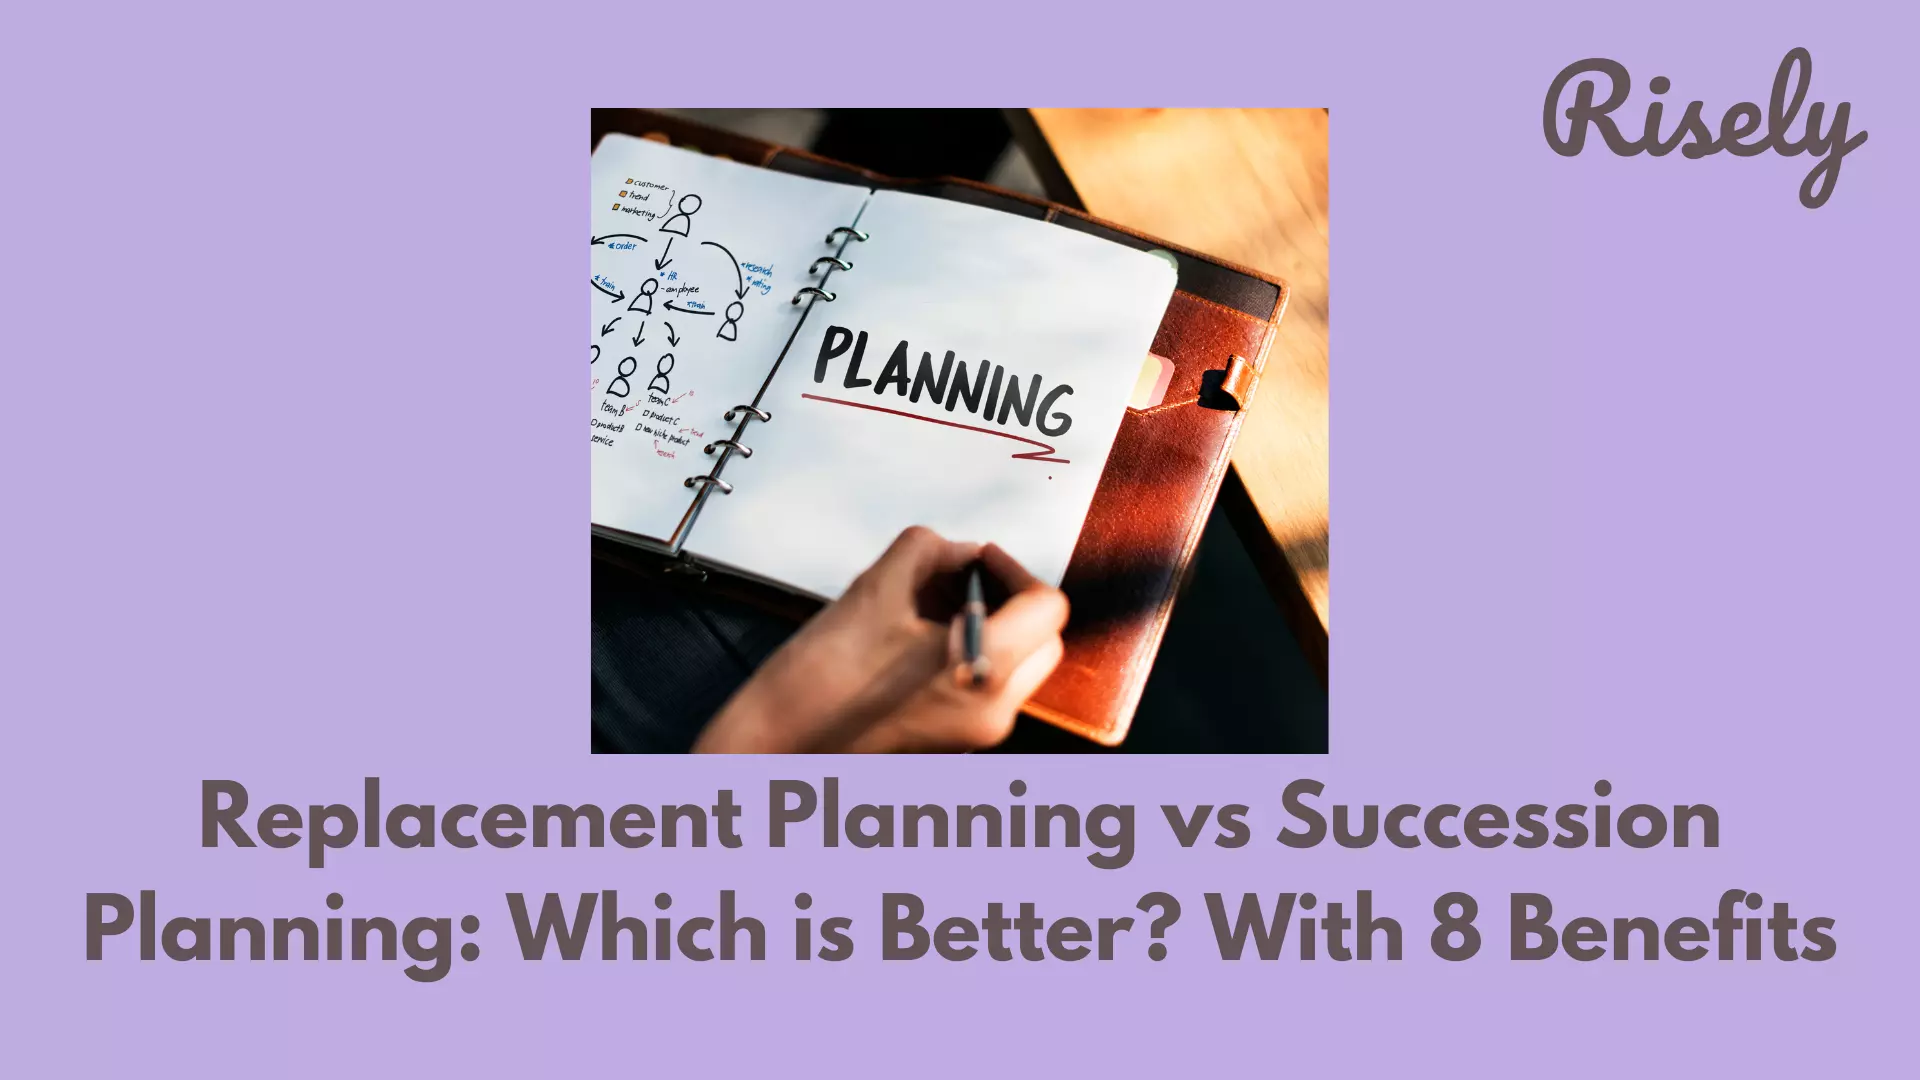 Replacement planning vs succession planning